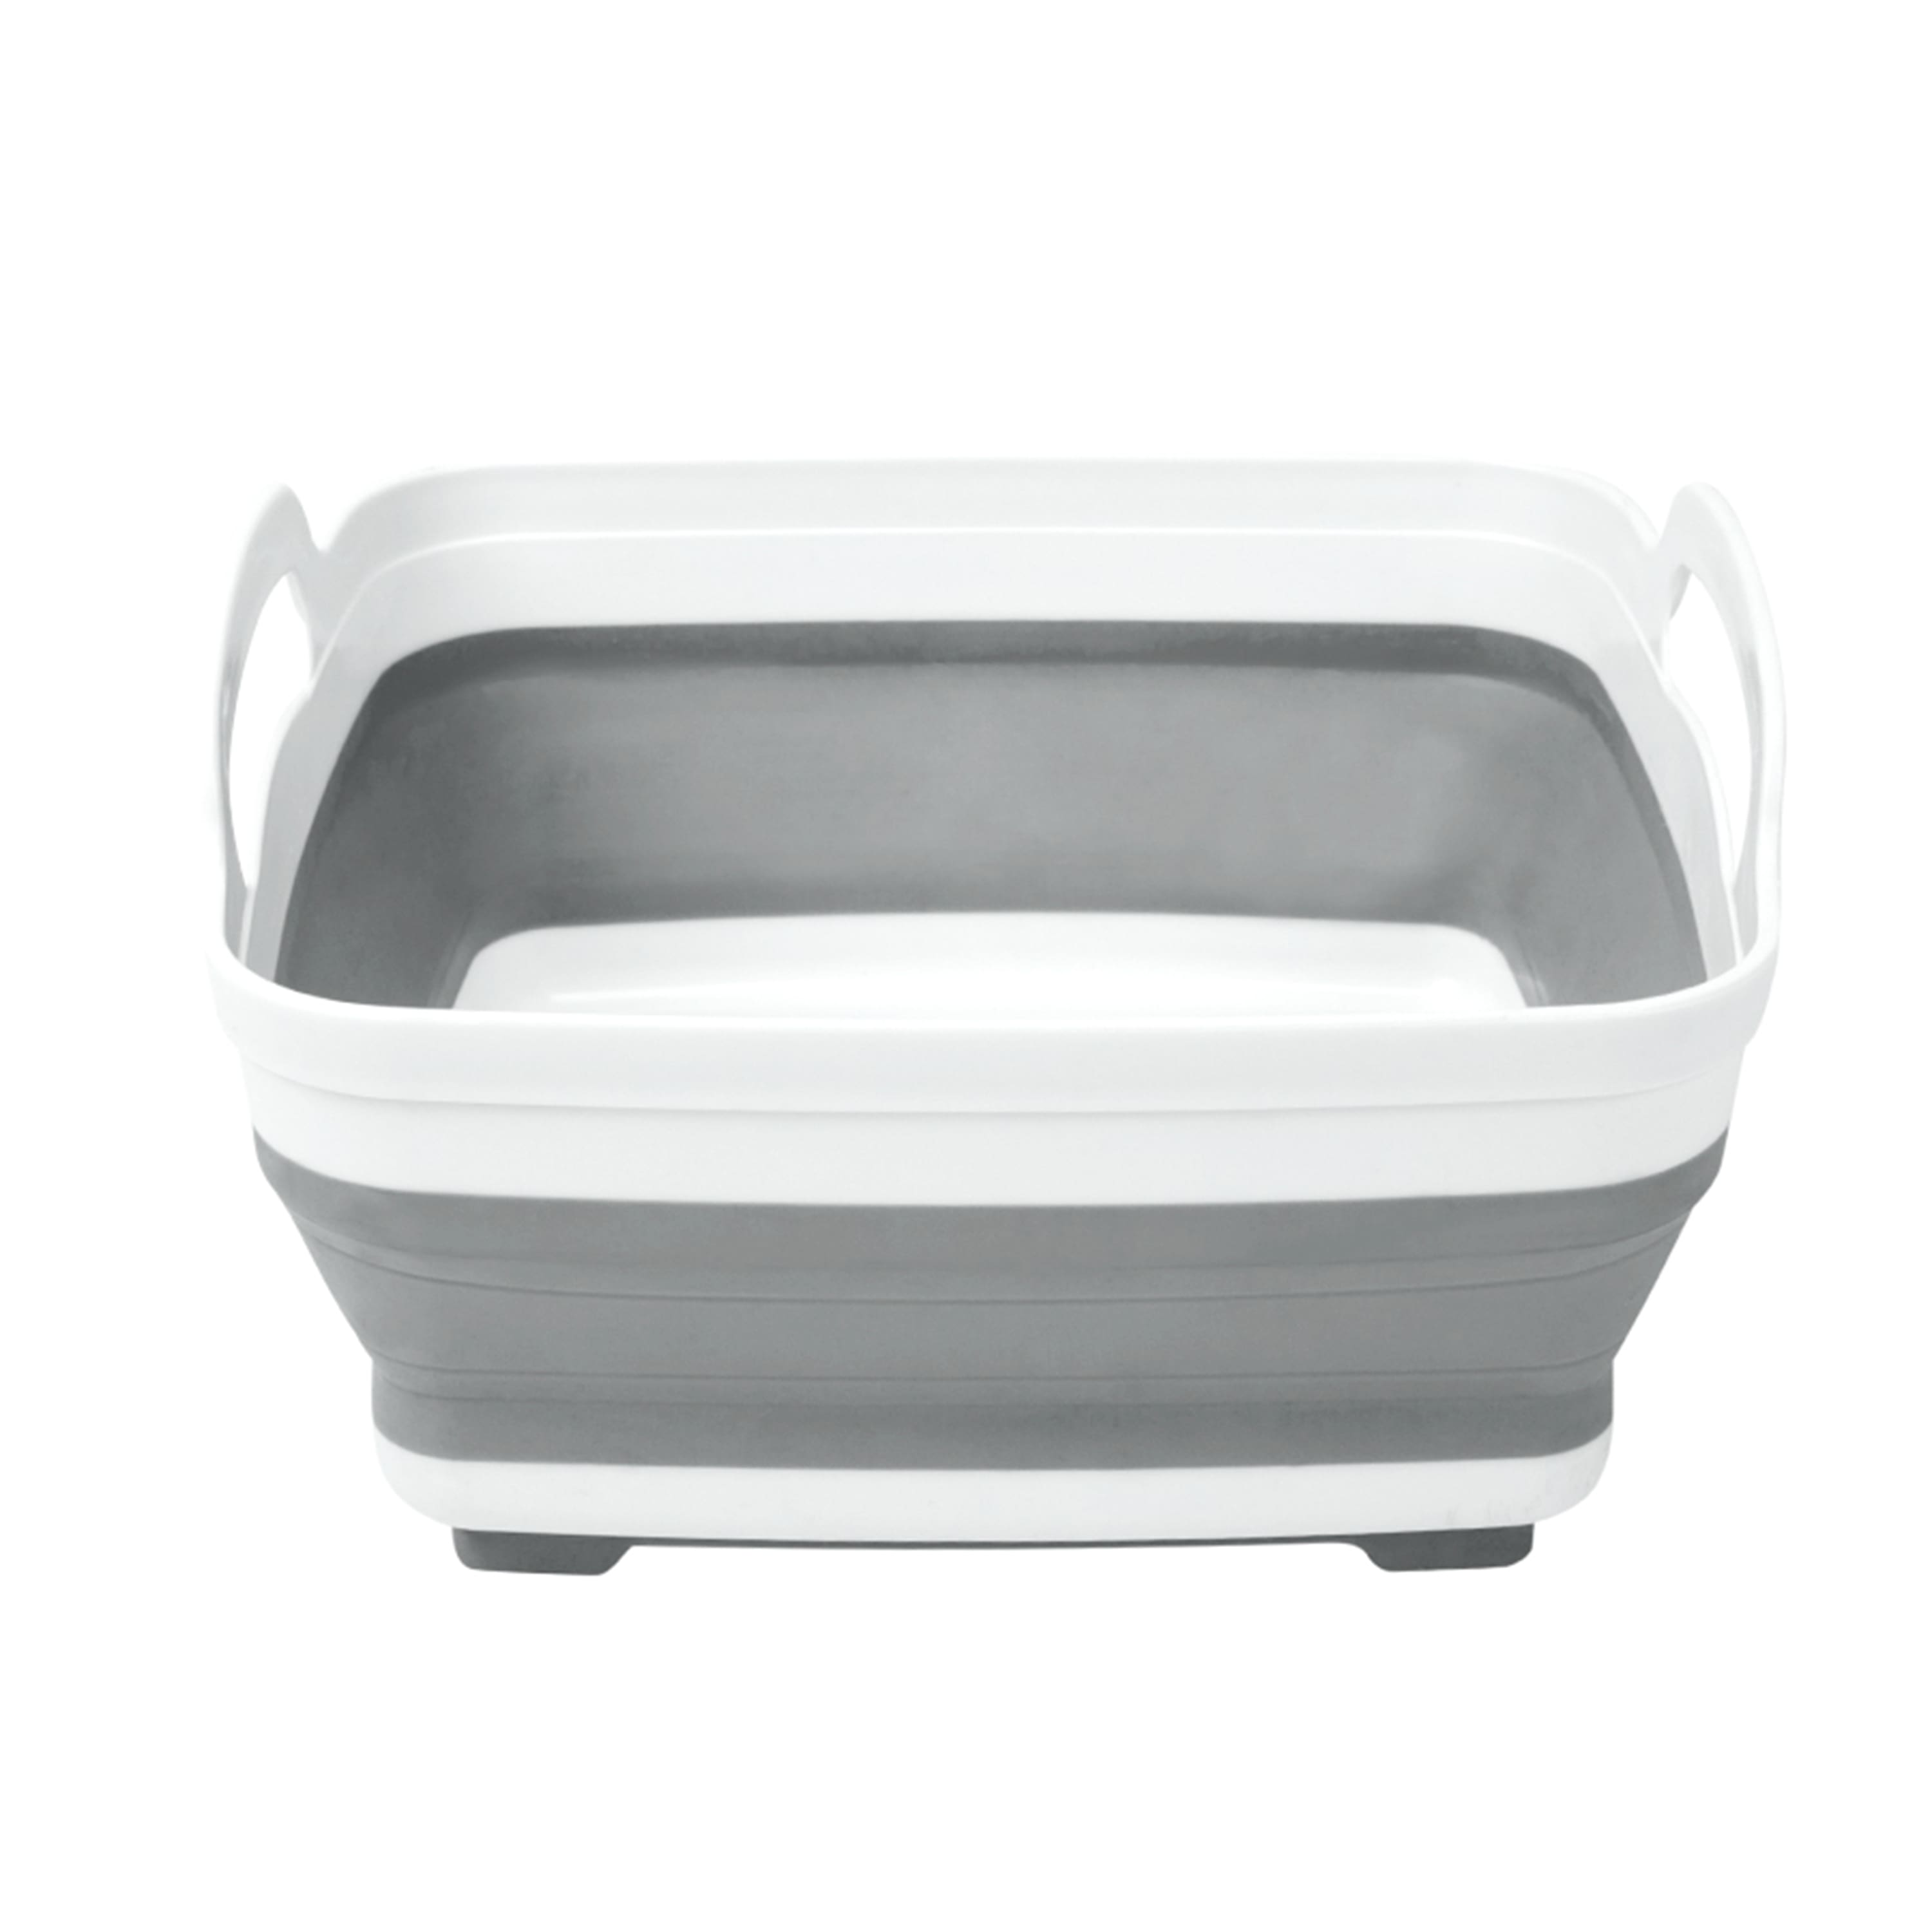 Kitchen Details Self Draining Collapsible Wash Basin